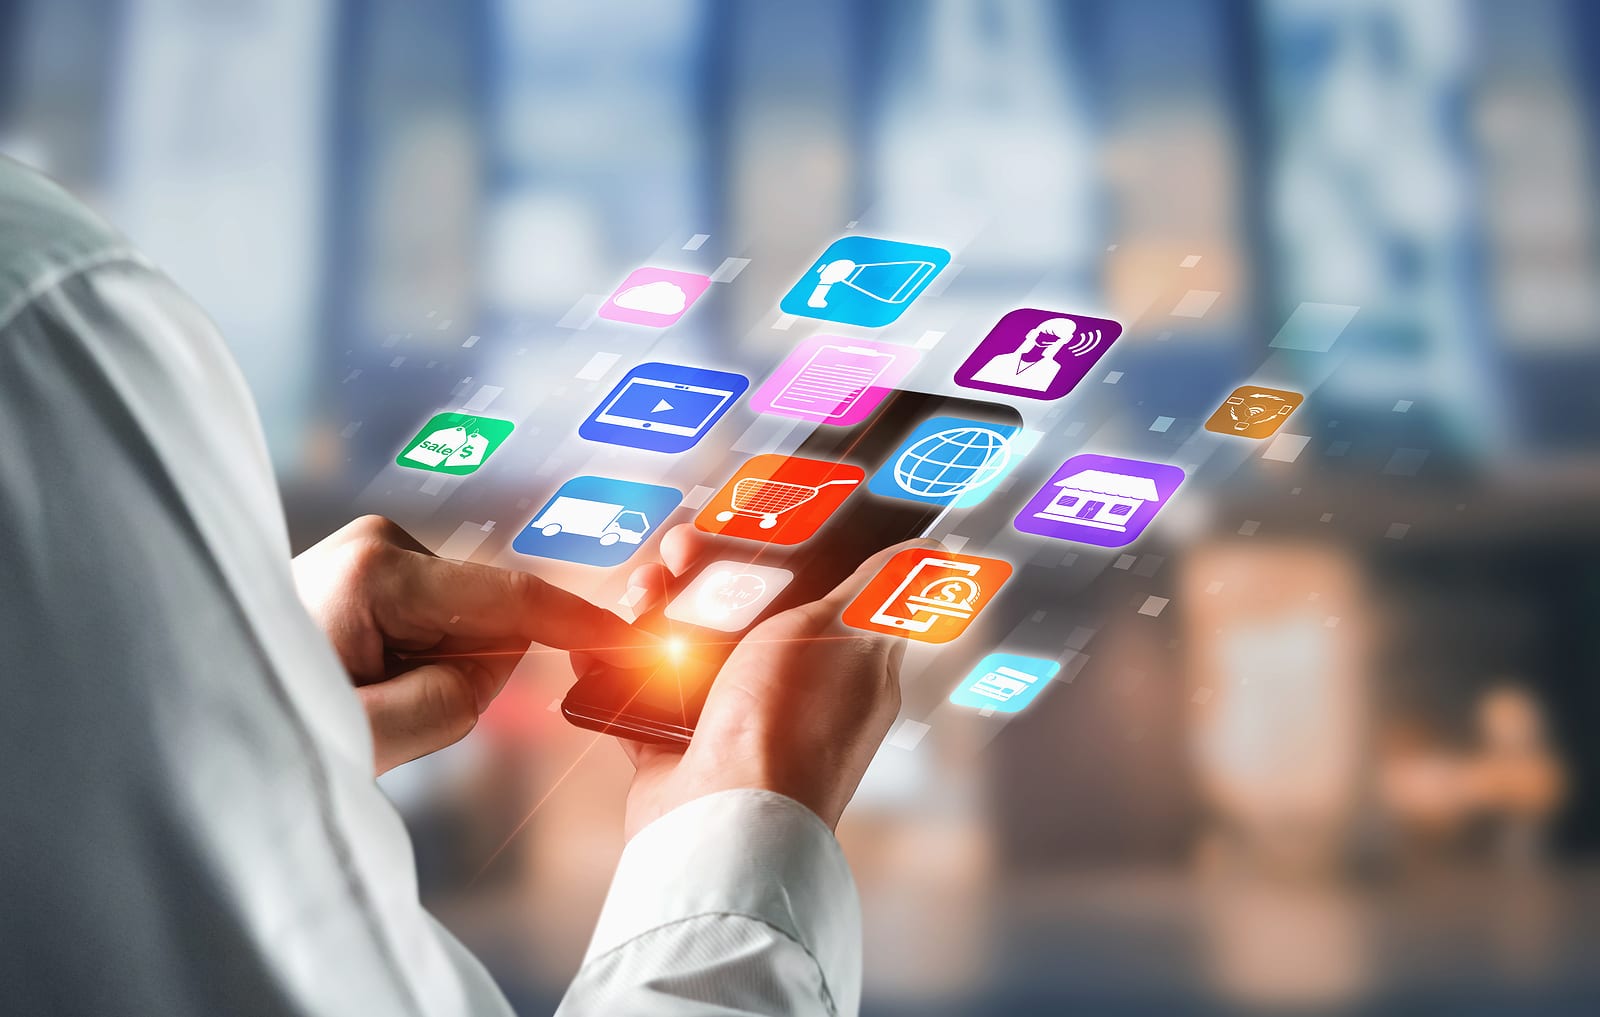 A person touches a smart phone screen and all of the apps appear in a floating manner above the phone, this conveys the evolution of technology and digital marketing